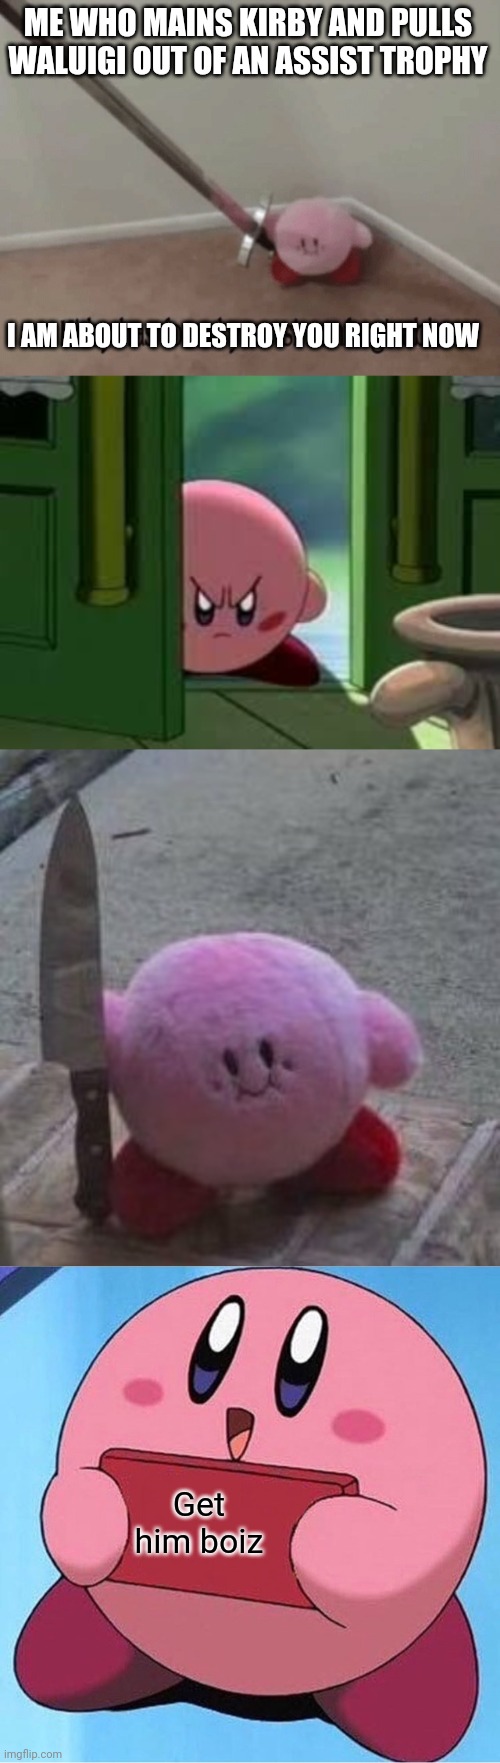 ME WHO MAINS KIRBY AND PULLS WALUIGI OUT OF AN ASSIST TROPHY I AM ABOUT TO DESTROY YOU RIGHT NOW Get him boiz | image tagged in kirby has found your sin unforgivable,pissed off kirby,creepy kirby,kirby holding a sign | made w/ Imgflip meme maker